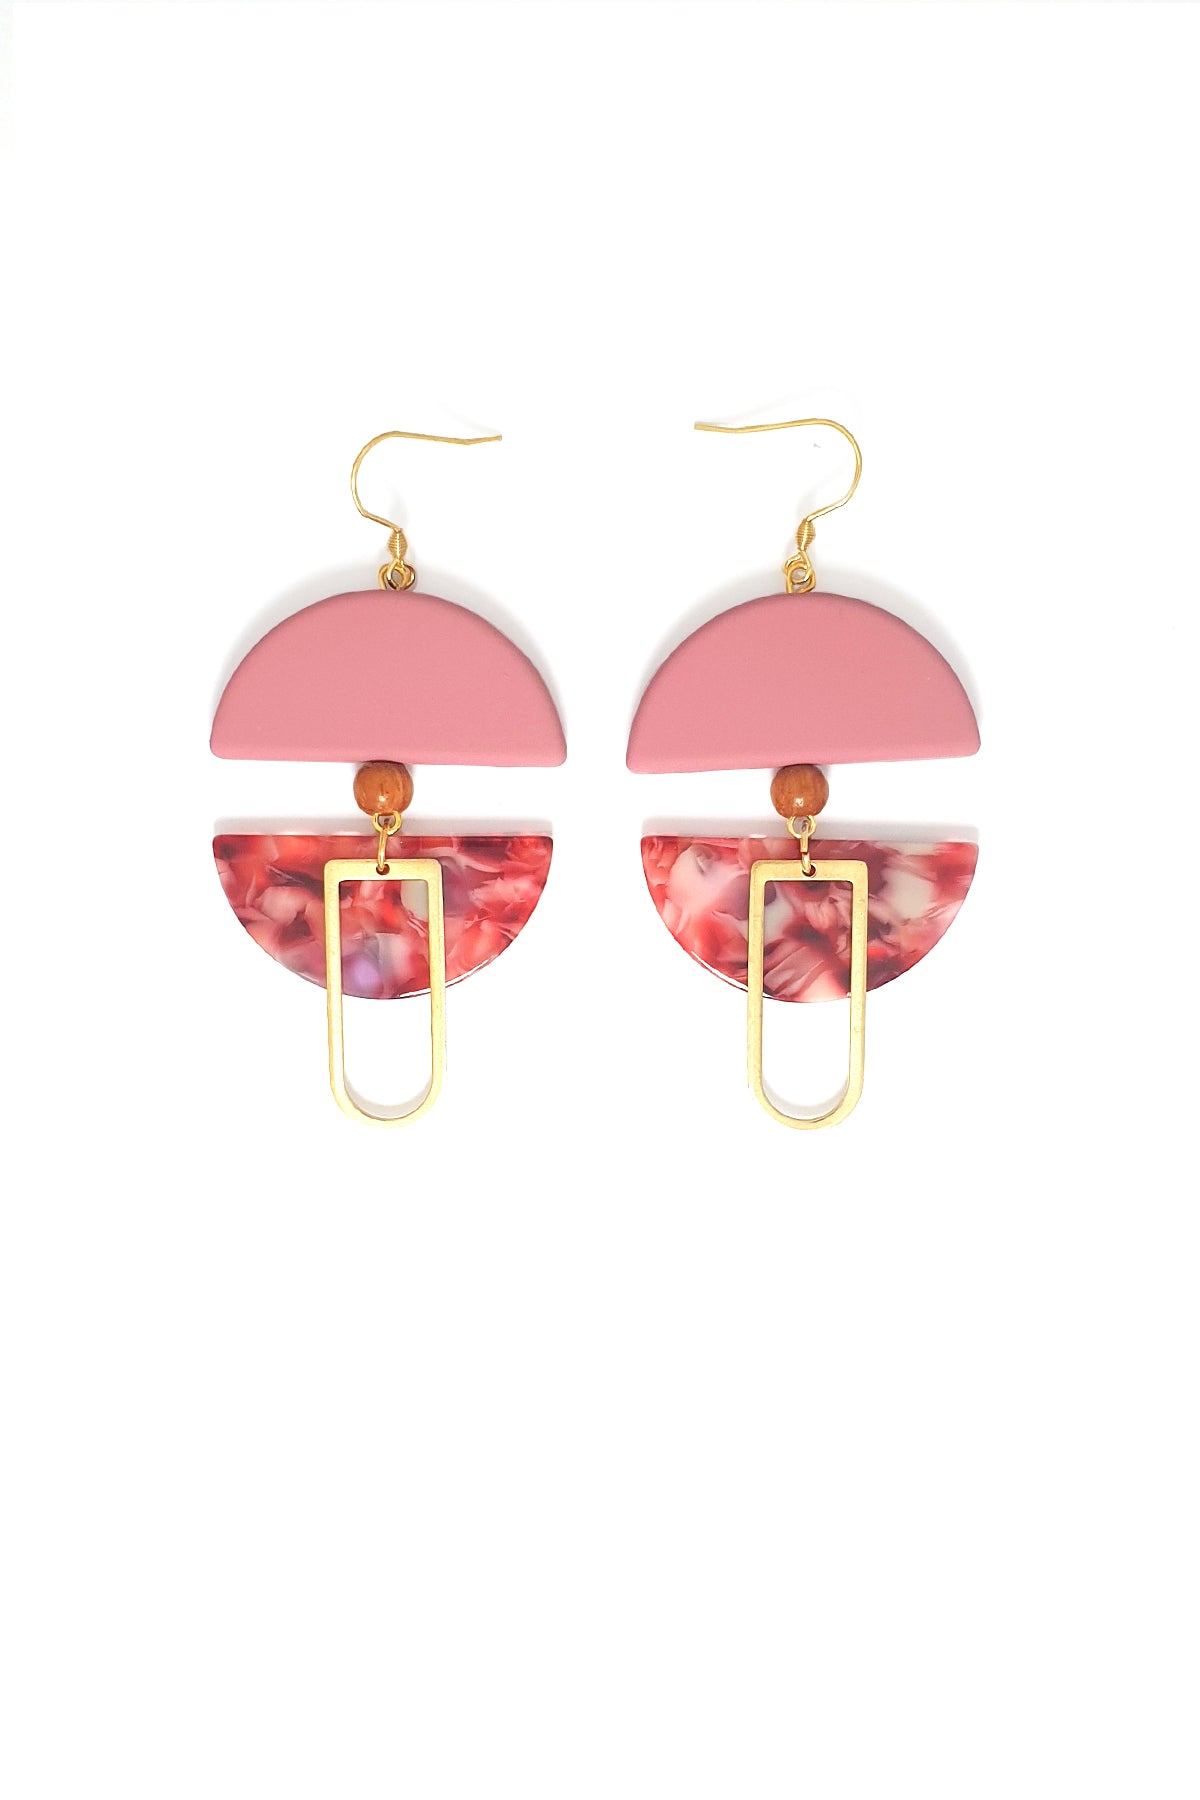 A pair of dangle earrings with a hook sit against a white background. They feature a pink arch shaped bead, a small wooden bead, a pink acrylic half circle, and an elongated D shape brass piece.